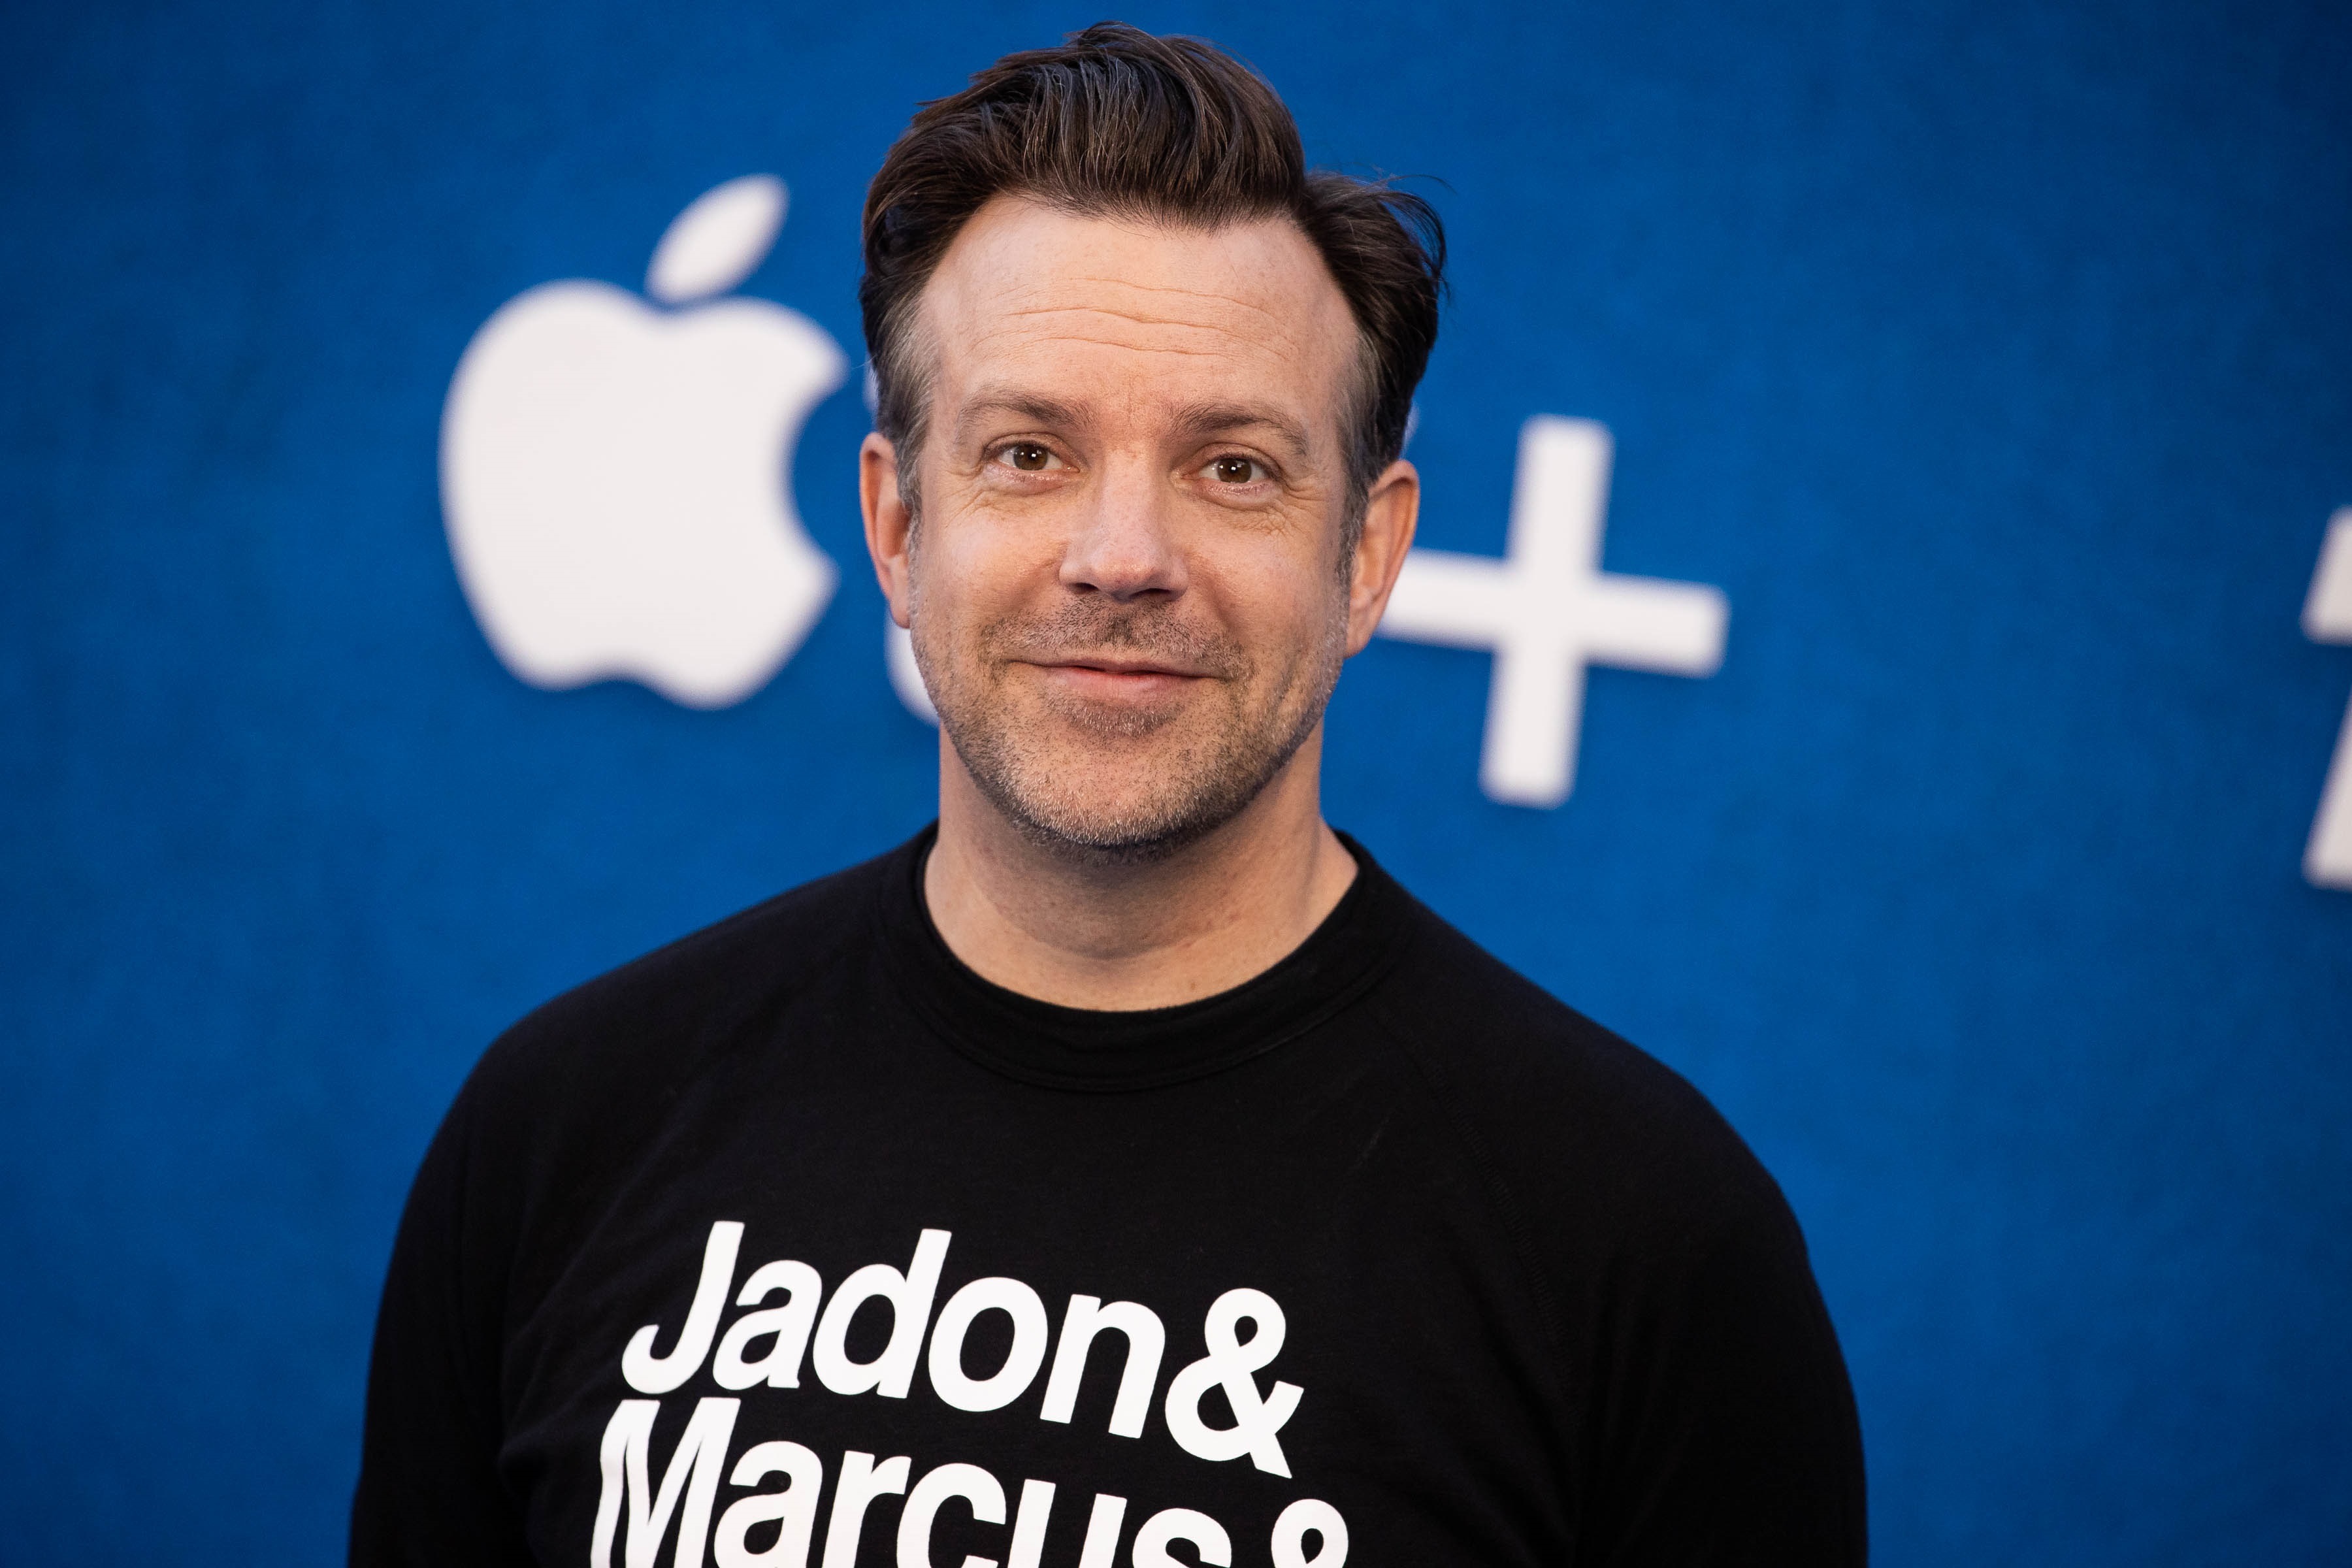 Jason Sudeikis smiling for photographers at the Ted Lasso Season 2 premiere awaiting the drop of new episodes to AppleTV+